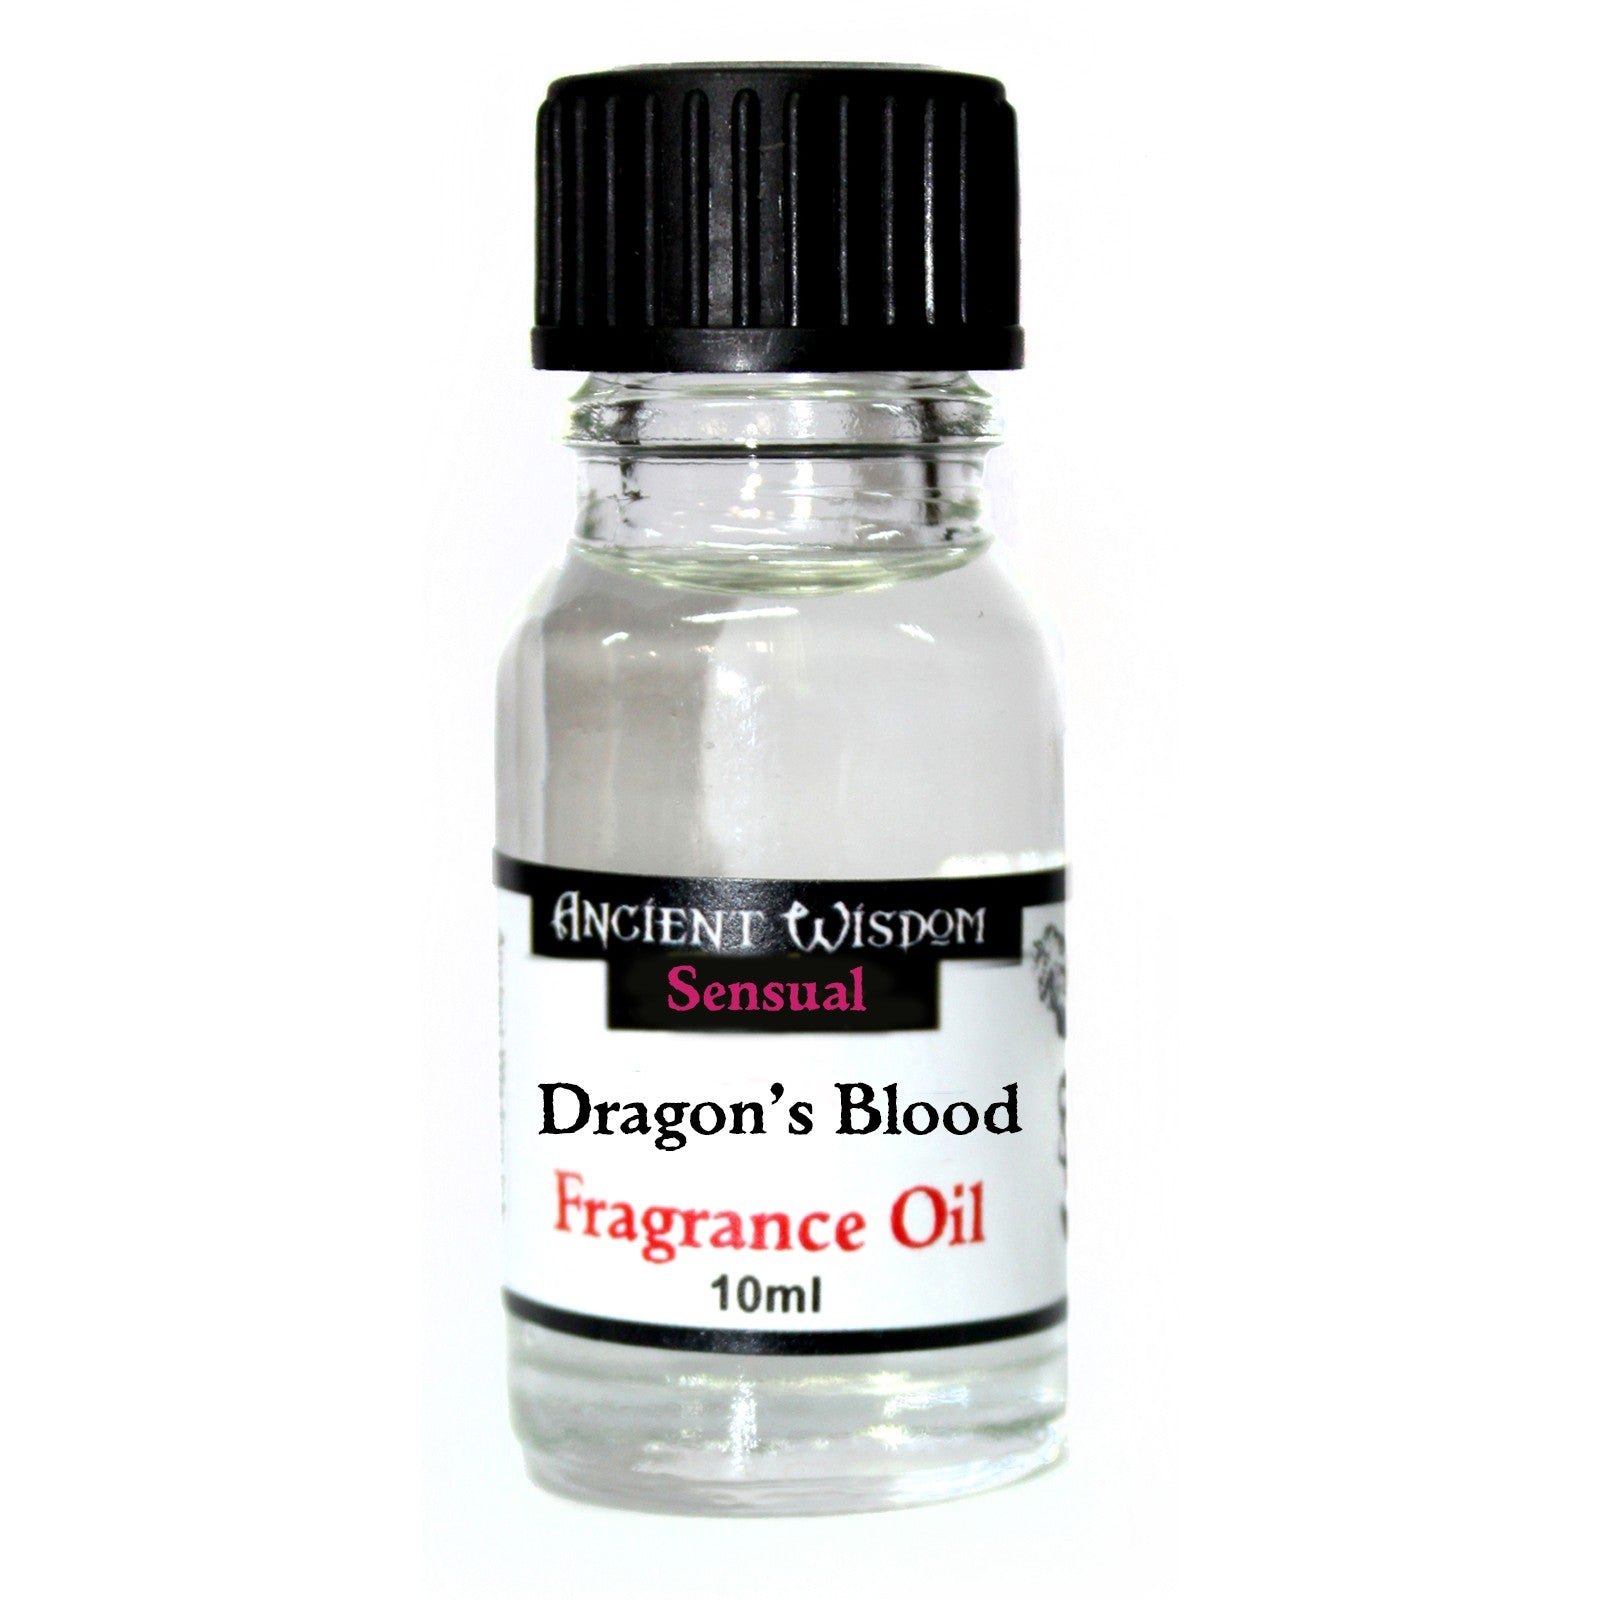 View 10ml Dragons Blood Fragrance Oil information